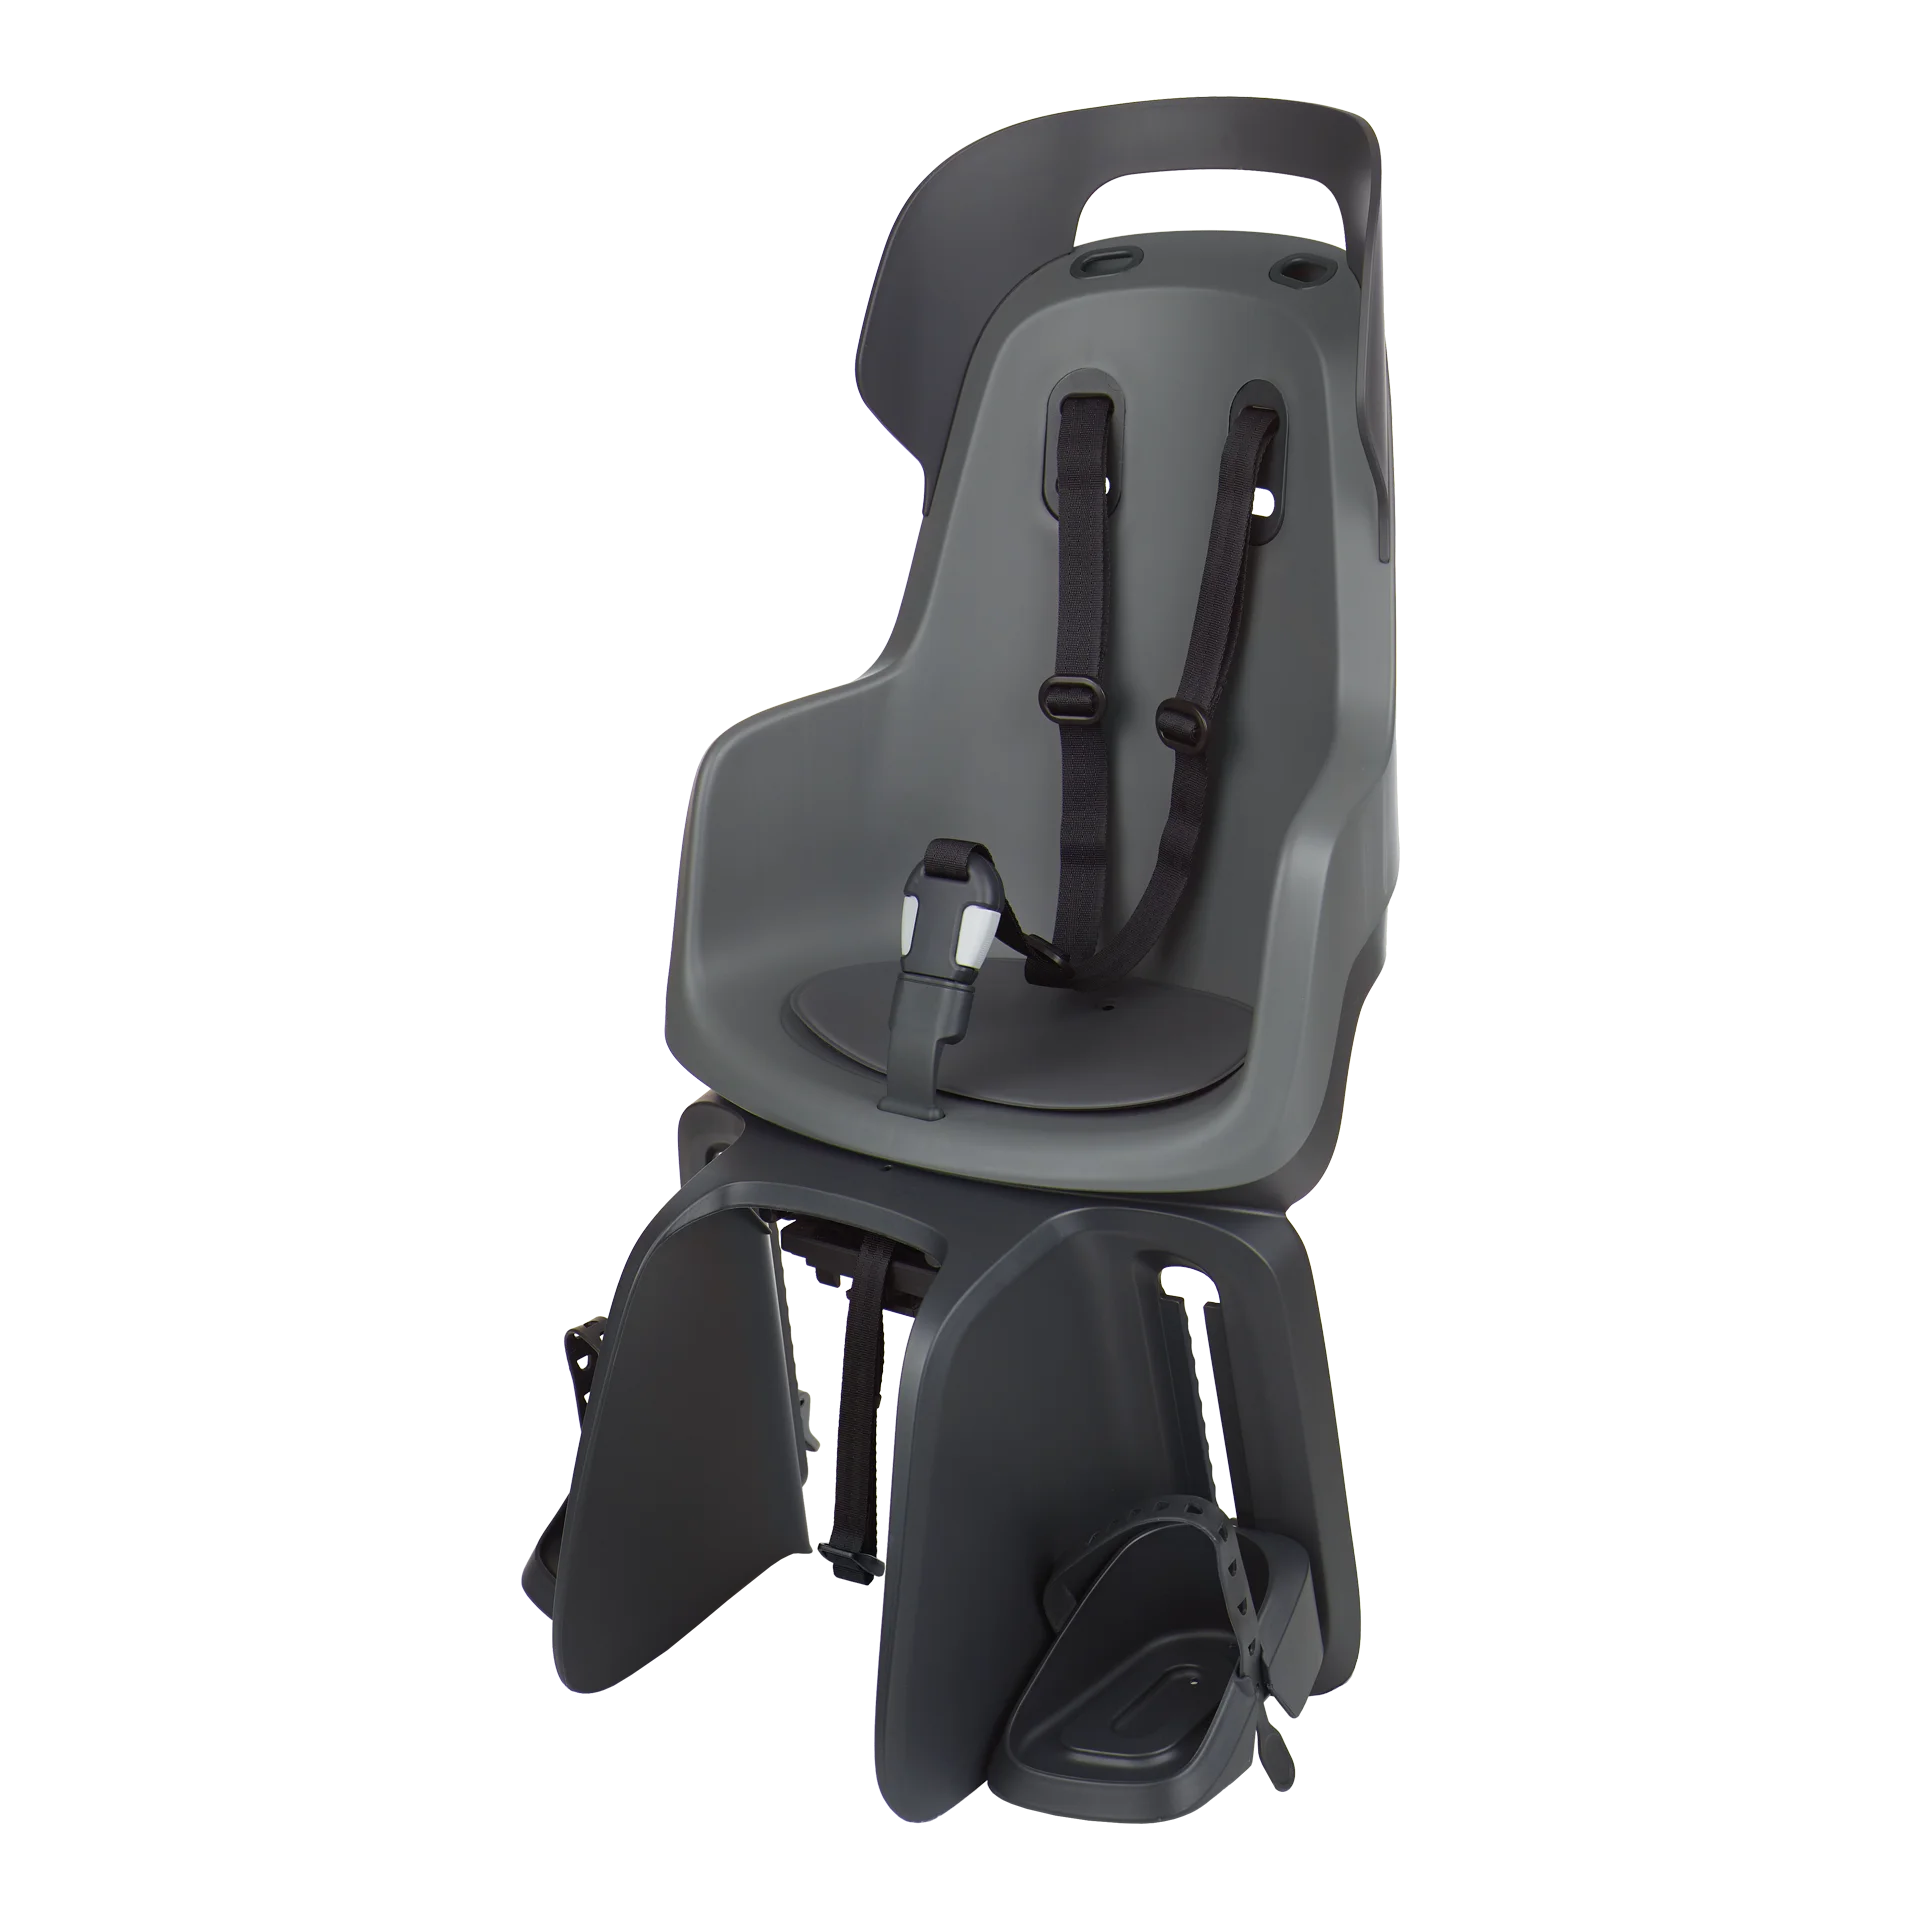 Rear bicycle safety seat, with a safety-belt of 3-points and a soft cushion for mik-hd carriers.